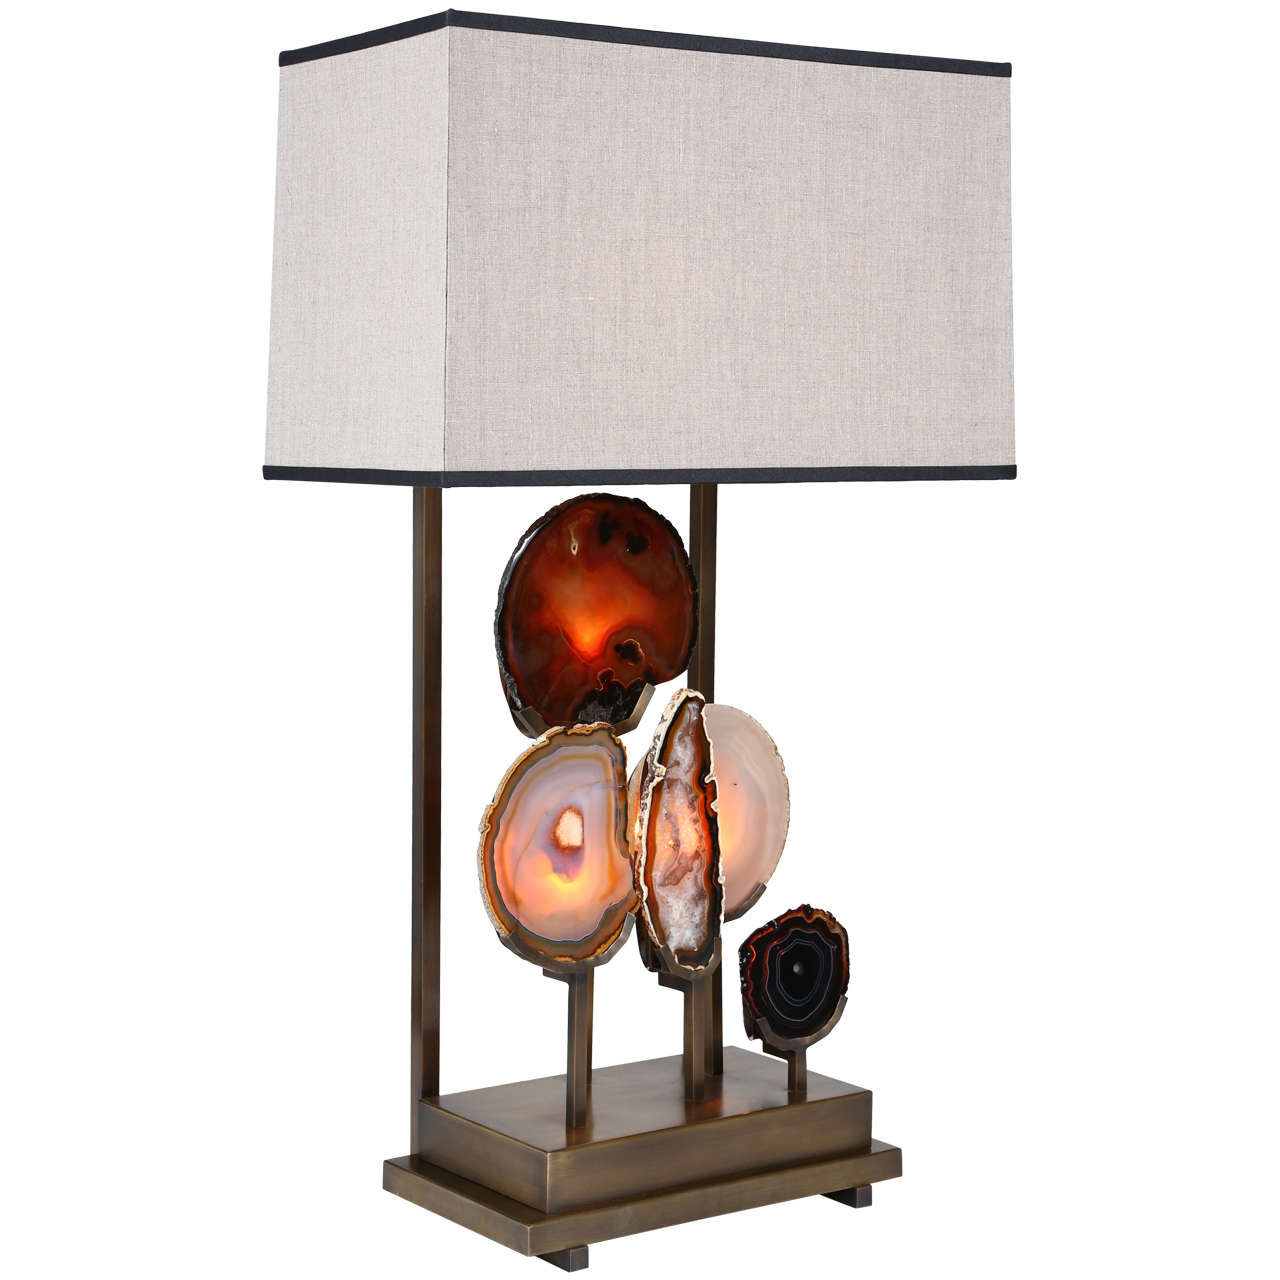 A stunning pair of custom-made “Pedra” table lamps by Patrick Dragonette for Dragonette Private Label, each featuring a quintet of beautiful agates mounted on a patinated brass base. The lamps are switched to illuminate the lampshade, agates or